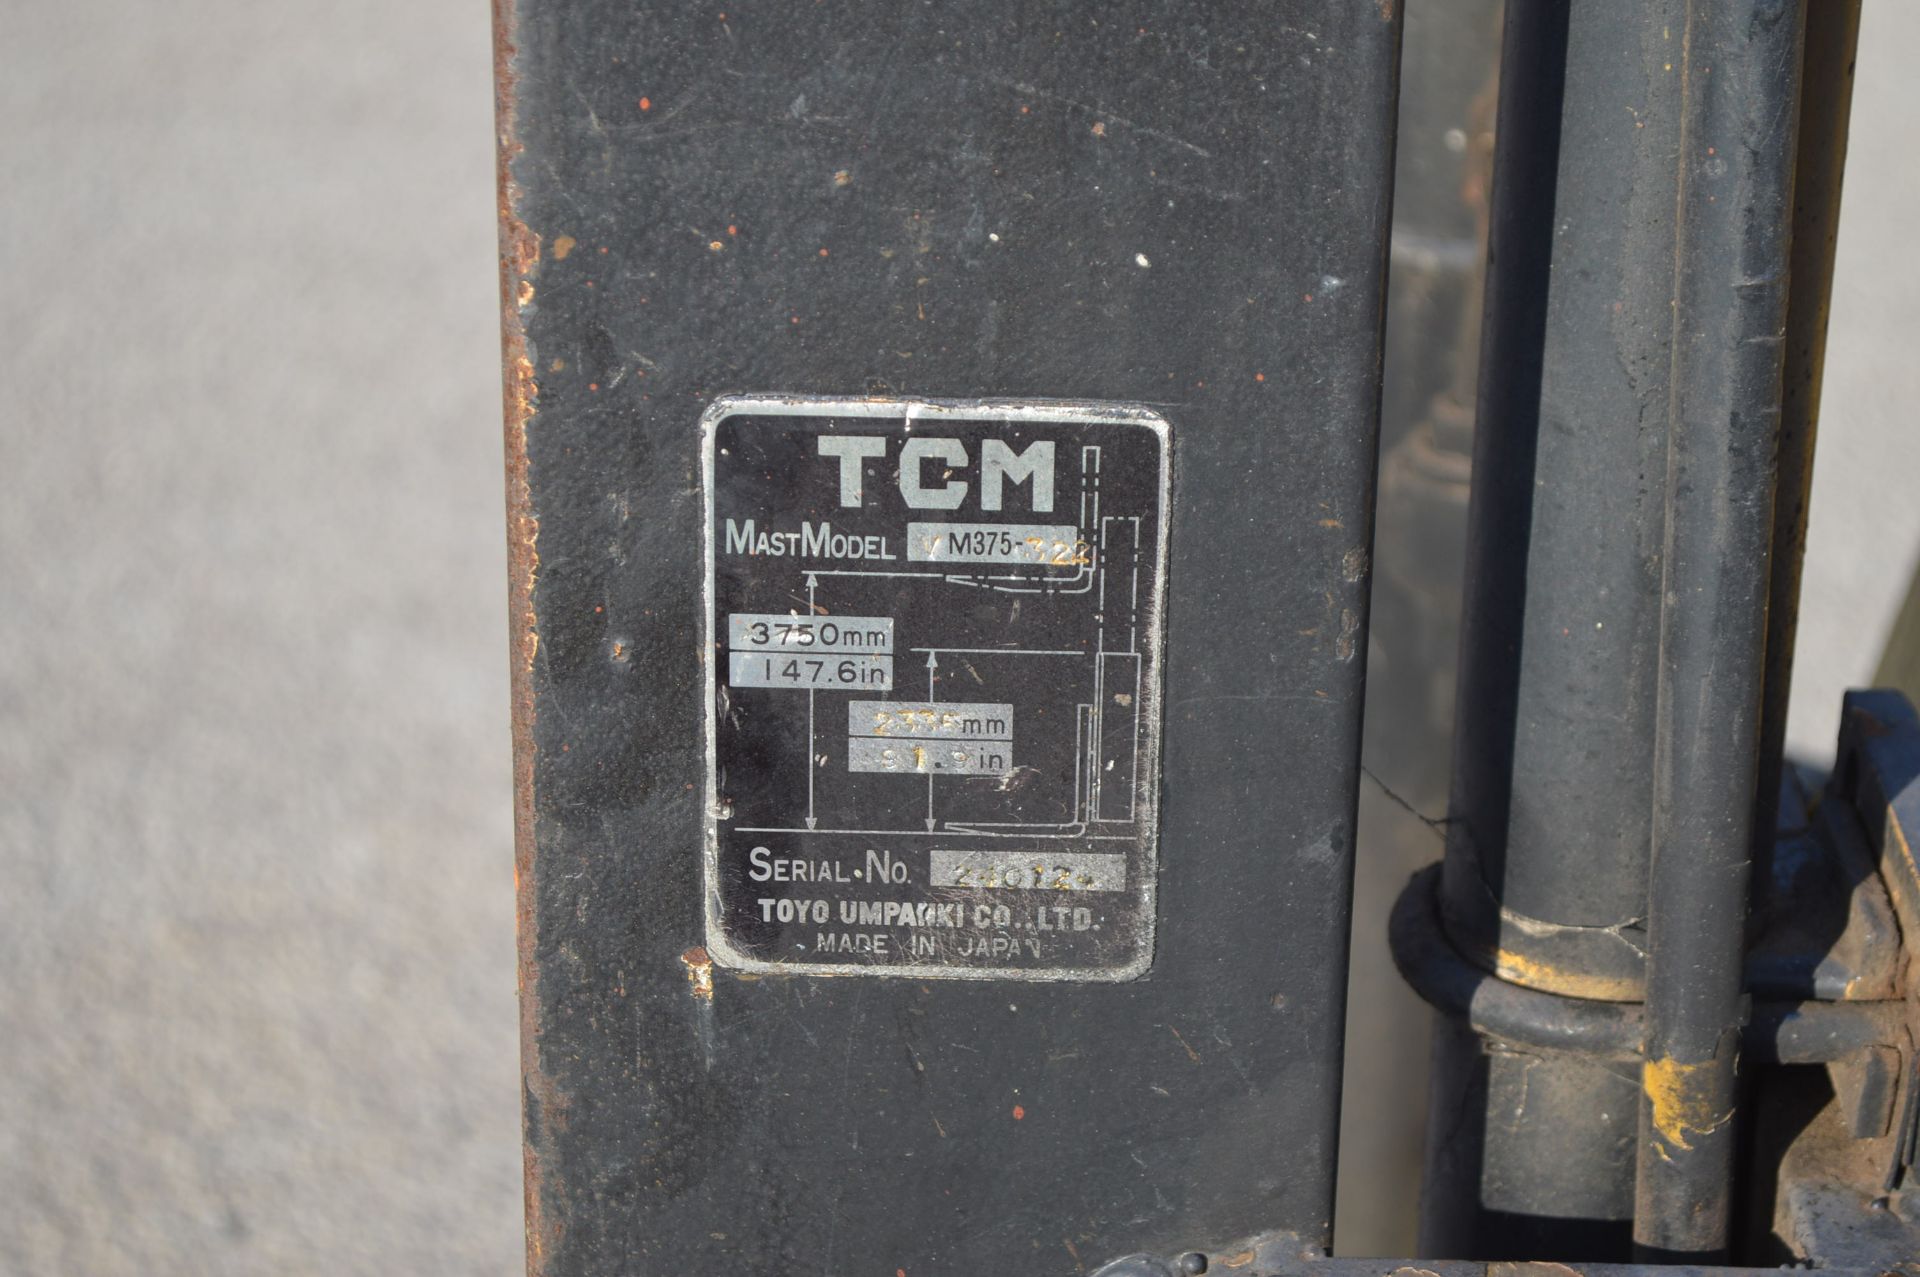 TCM 1.75T LPG FORKLIFT - GAS BOTTLE NOT INCLUDED   BRAKES GOOD RATED CAPACITY: 1600KG MAX FORK - Image 13 of 14